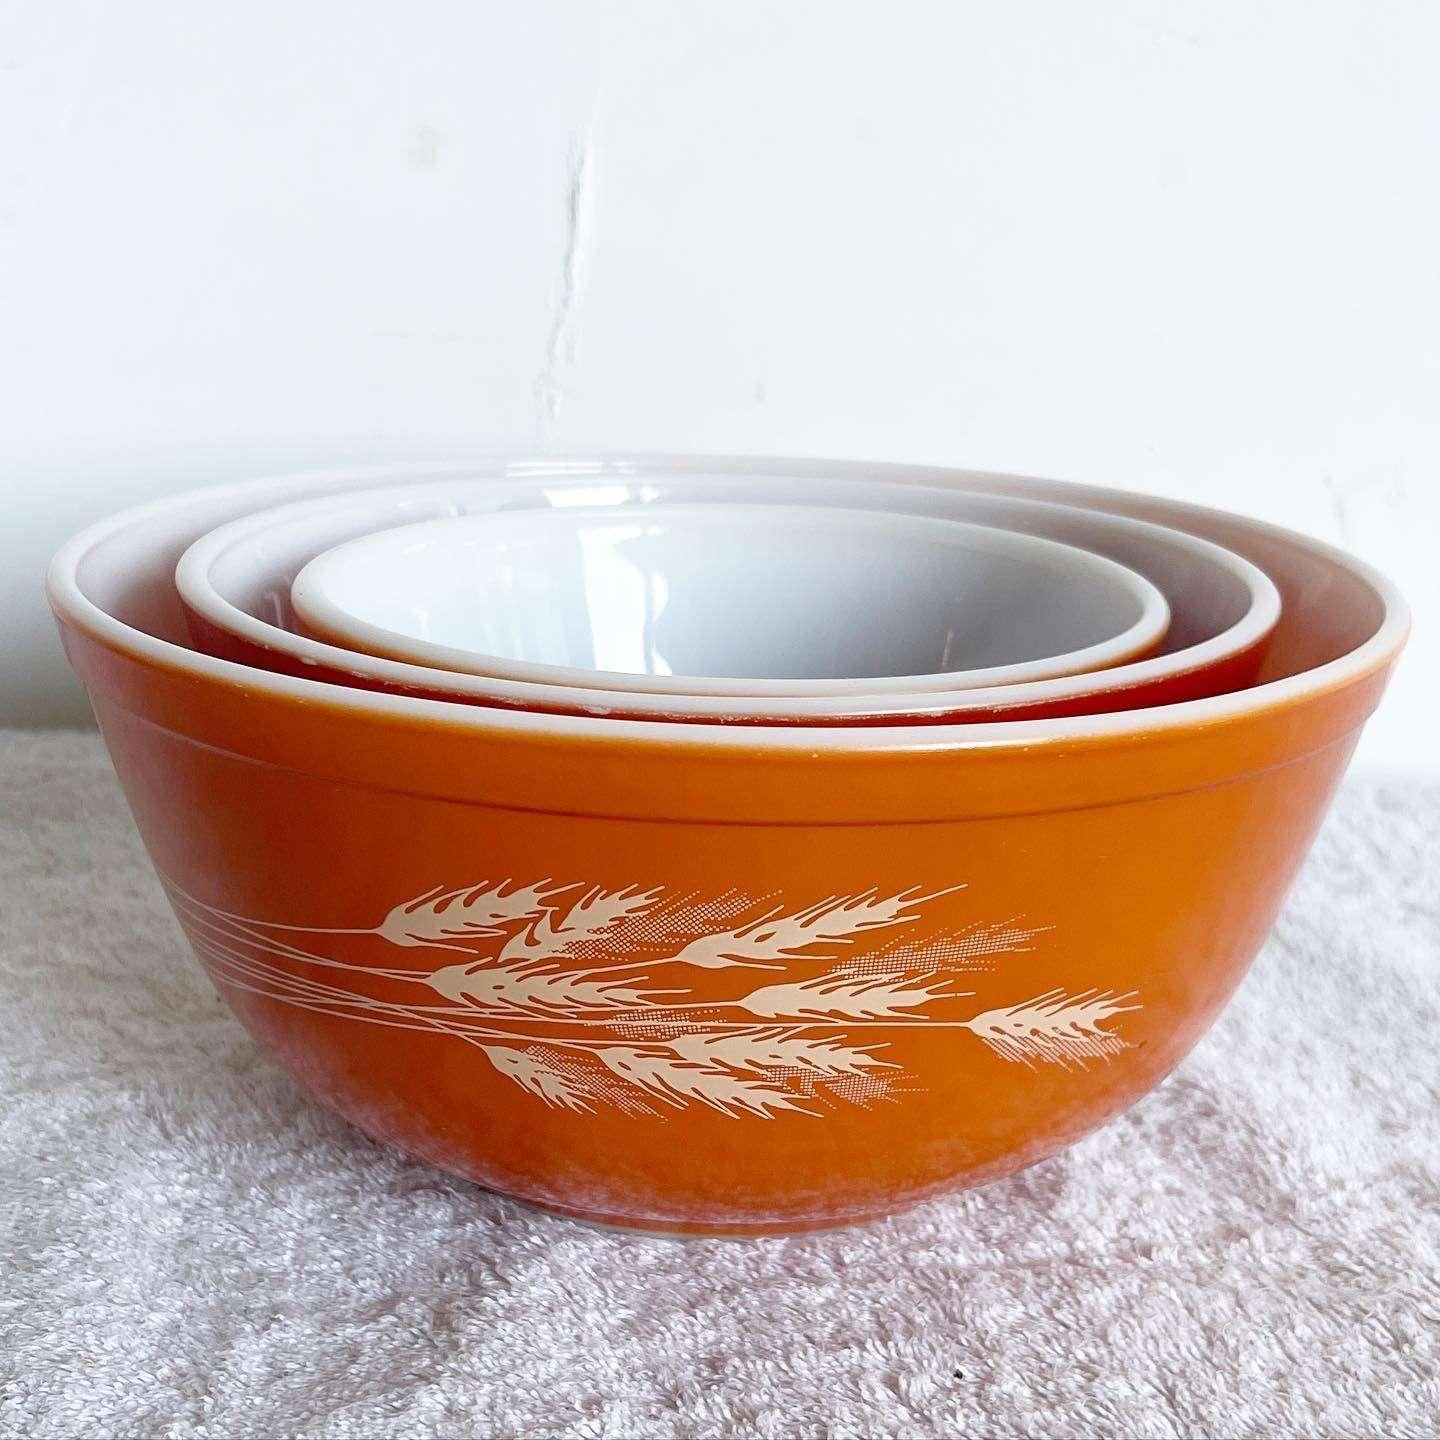 Add a touch of autumnal beauty to your kitchen with this stunning set of Vintage Autumn Harvest Bowls by Pyrex. Featuring a vibrant 